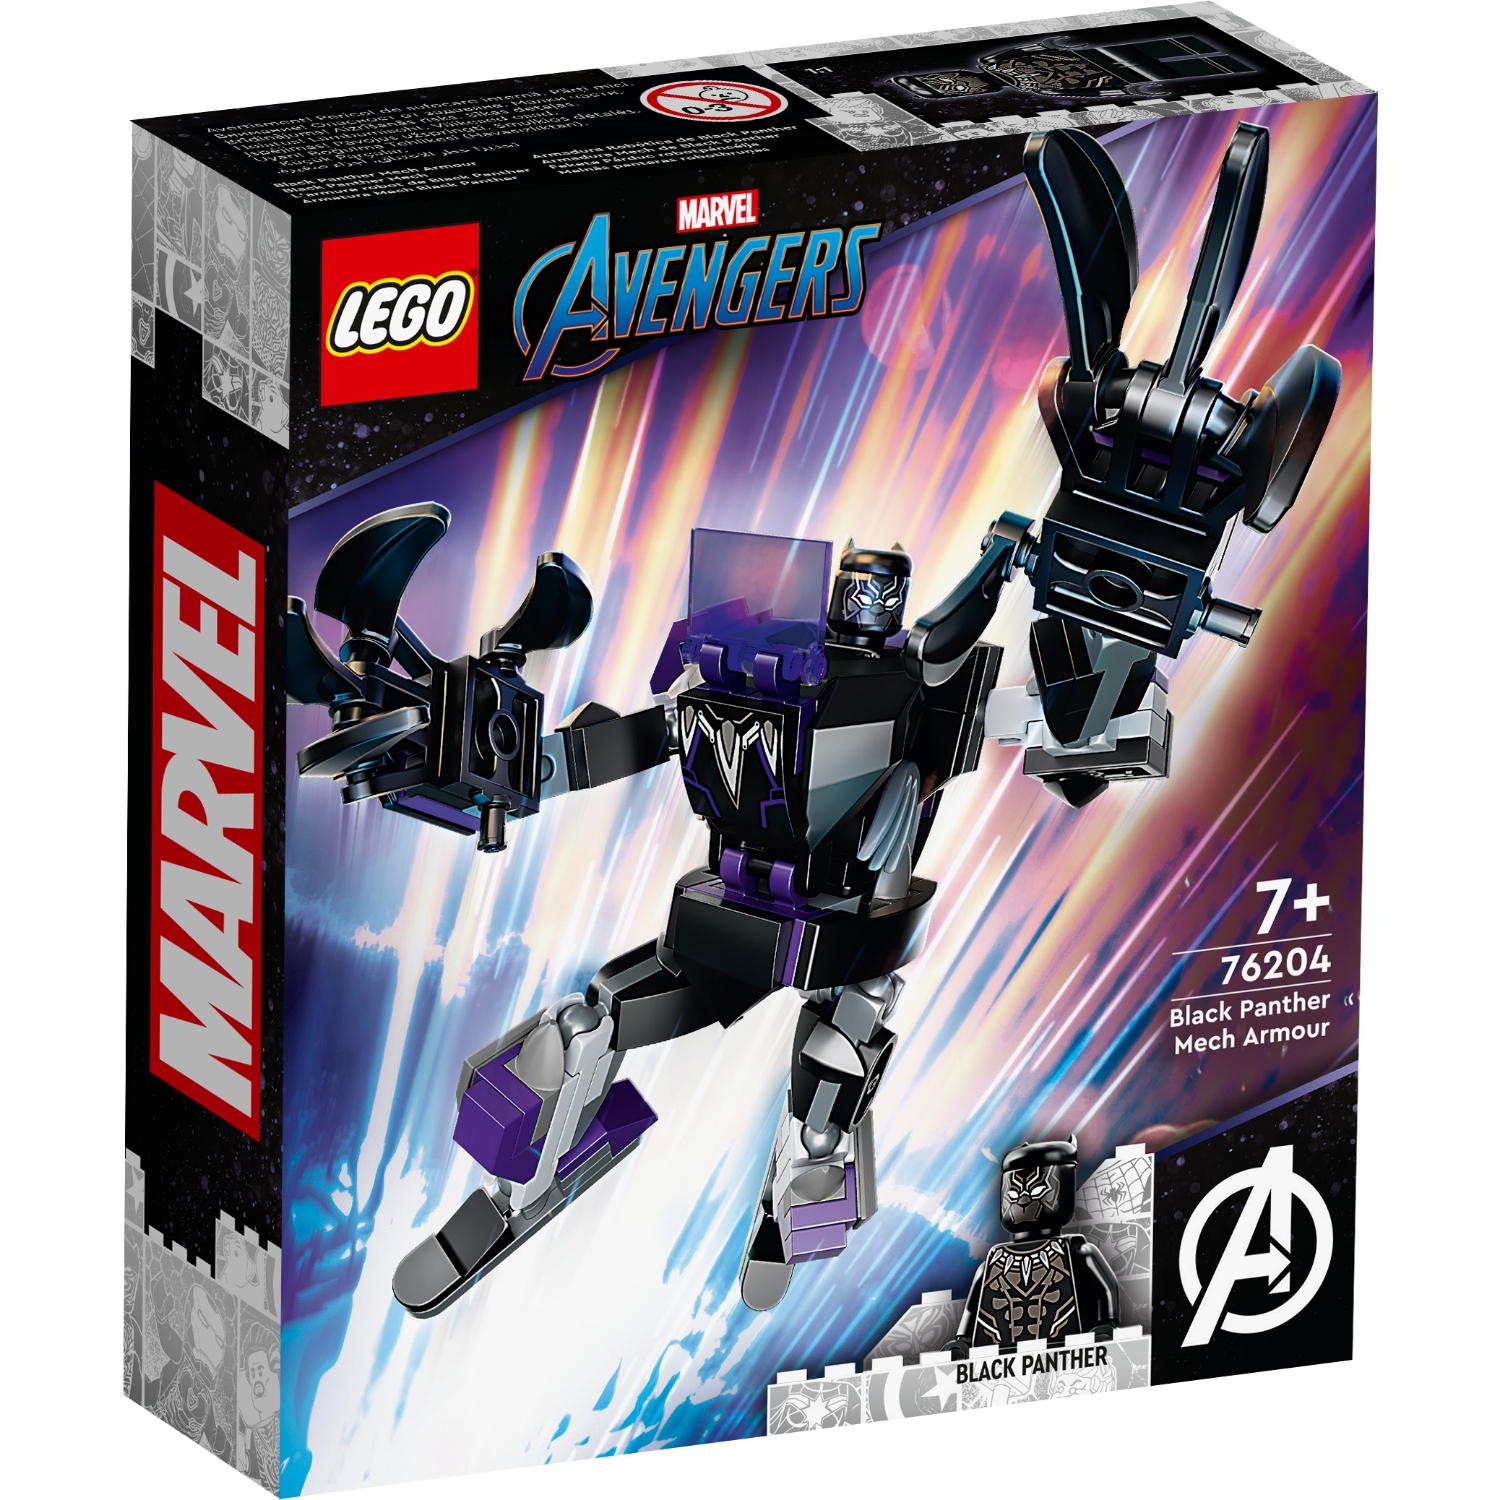 Lego Super Heroes 76204 Black Panther Mech Armour